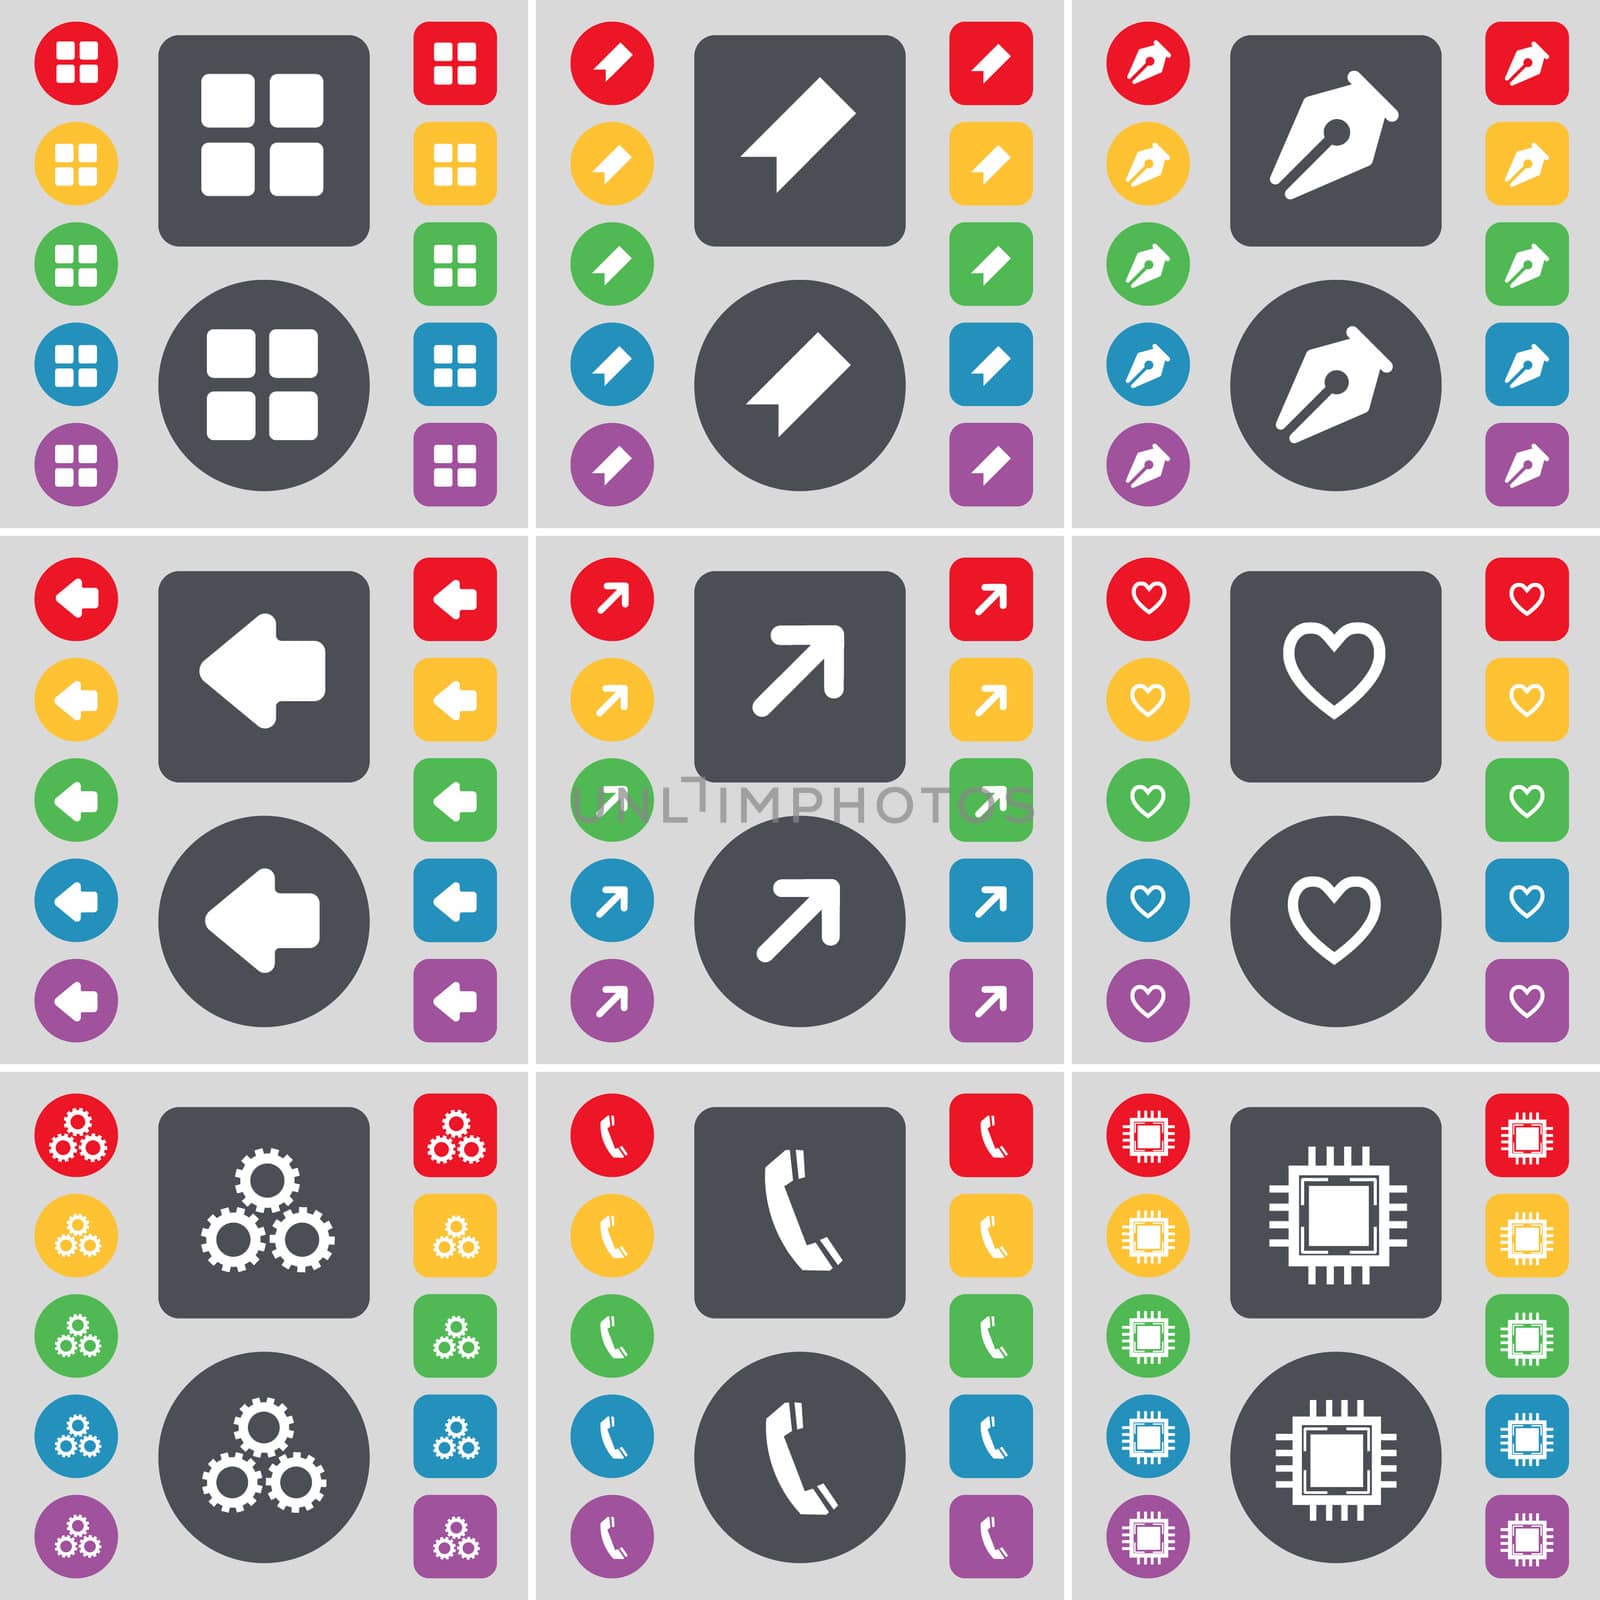 Apps, Marker, Ink pen, Arrow left, Full screen, Heart, Gear, Receiver, Processor icon symbol. A large set of flat, colored buttons for your design.  by serhii_lohvyniuk